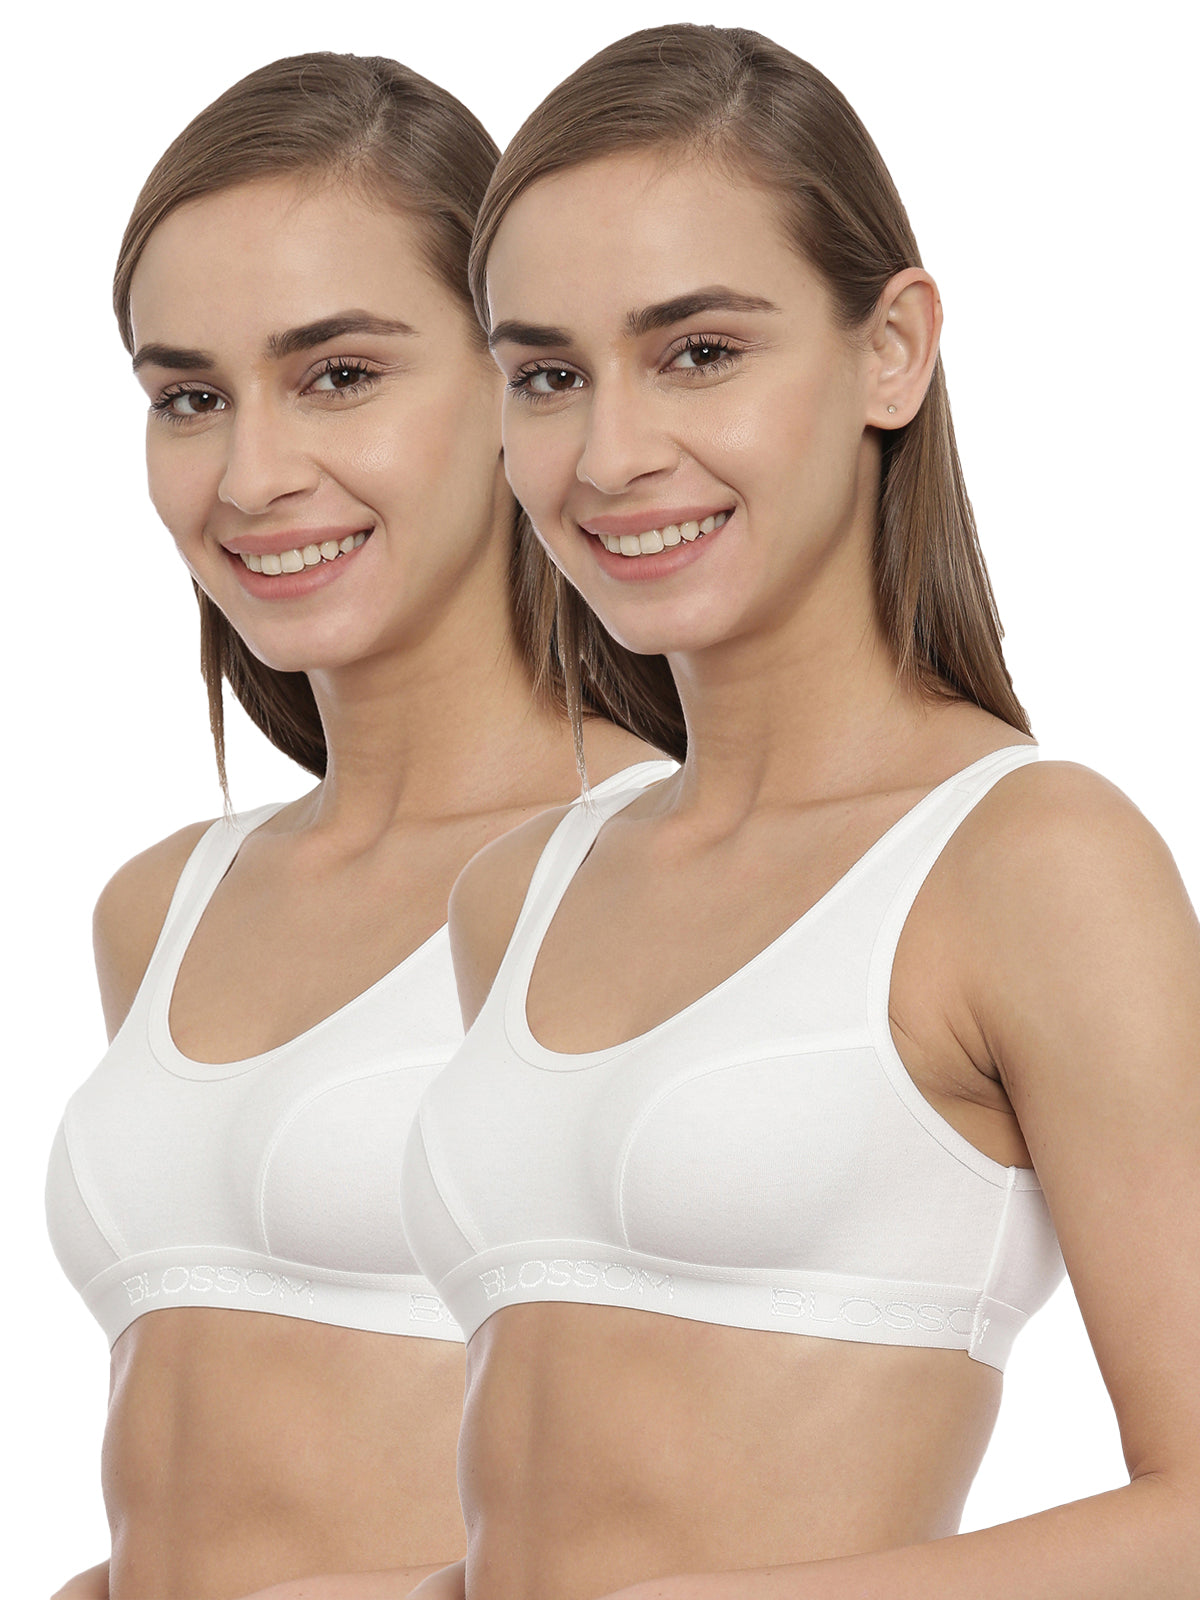 blossom-sporty bra-Pack of 2-white1-Sports collection-utility based bra